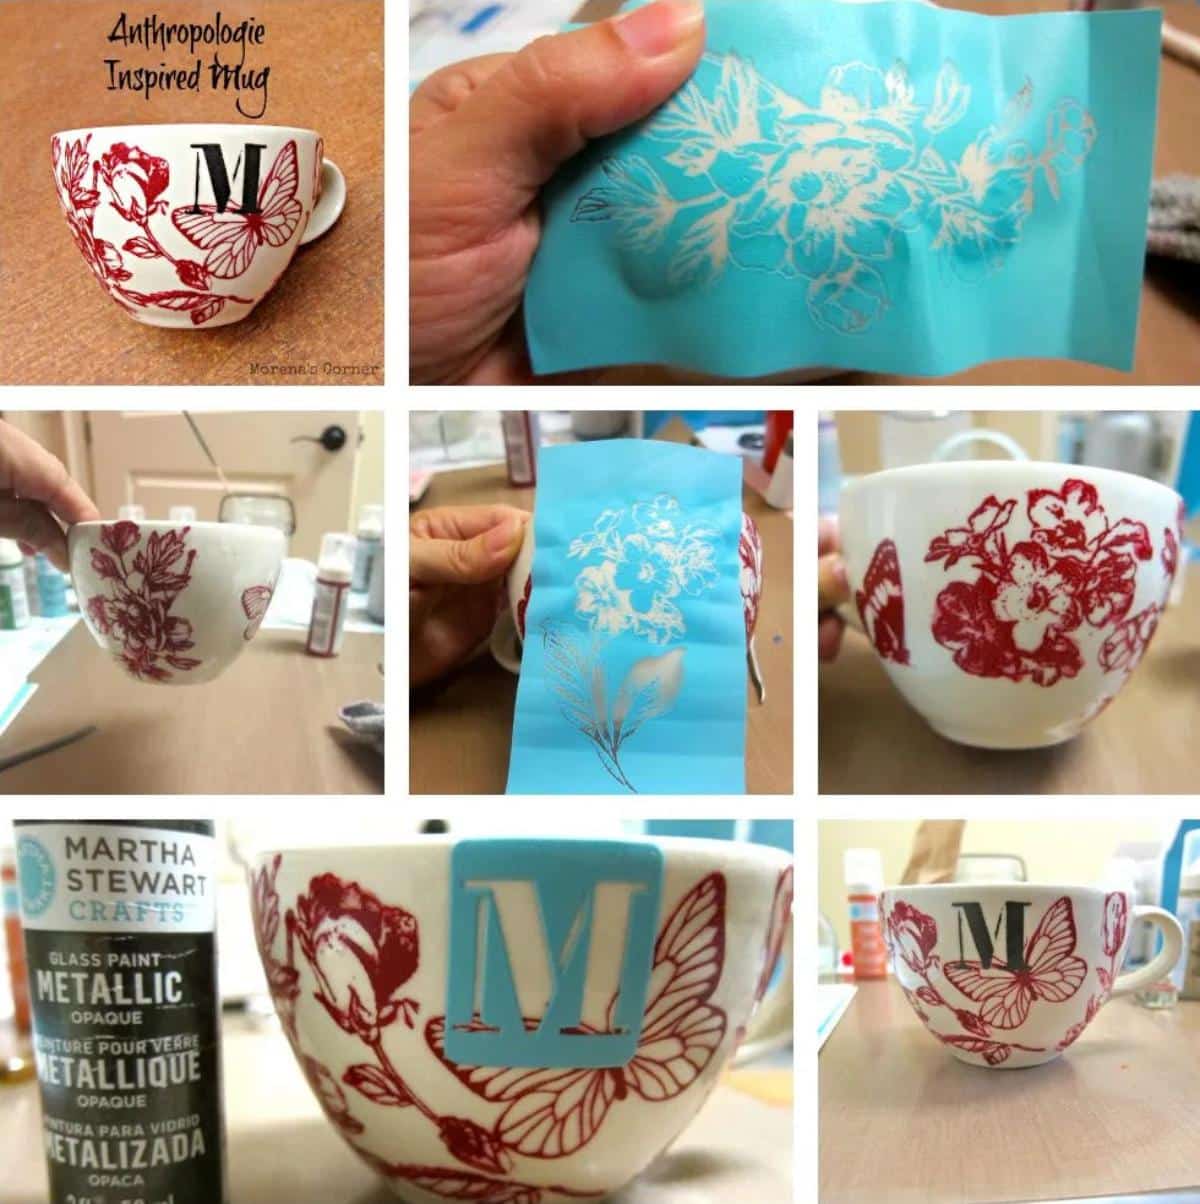 Anthro Inspired Mug made with Martha Stewart Glass Paints collage.